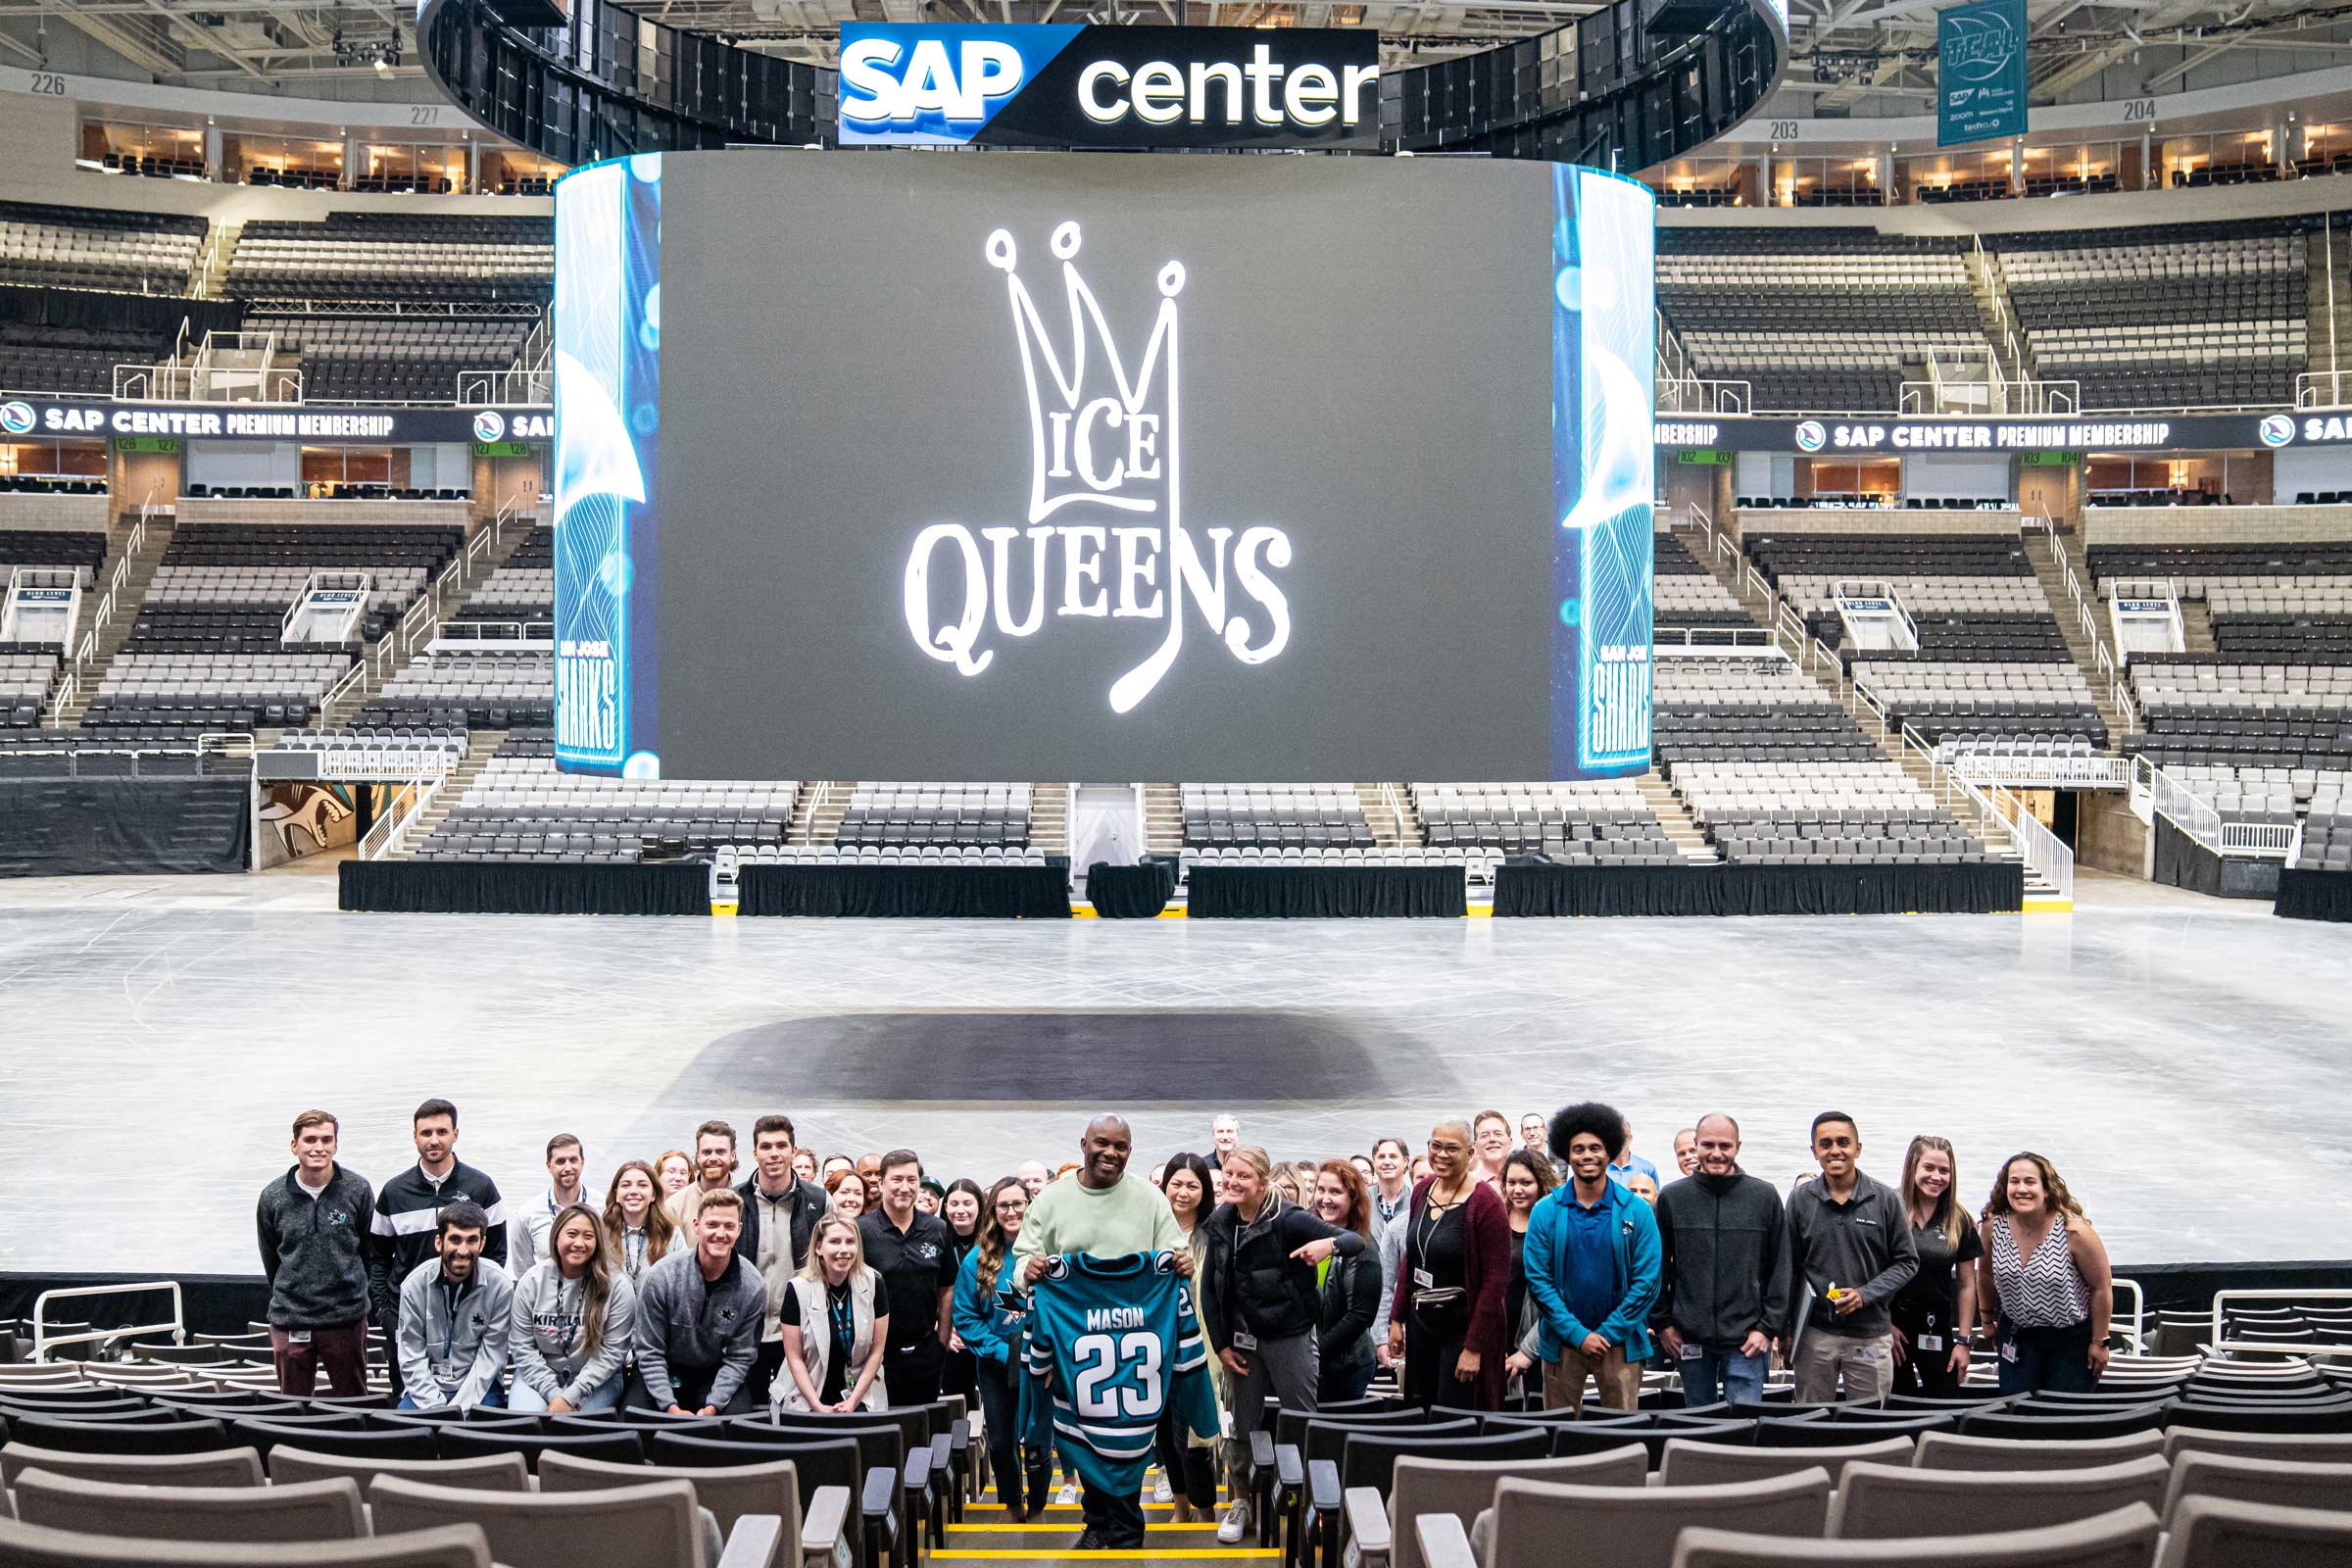 Team Teal hosts filmmaker Kwame Brown for a viewing of his documentary "Ice Queens" on the center hung scoreboard at SAP Center.